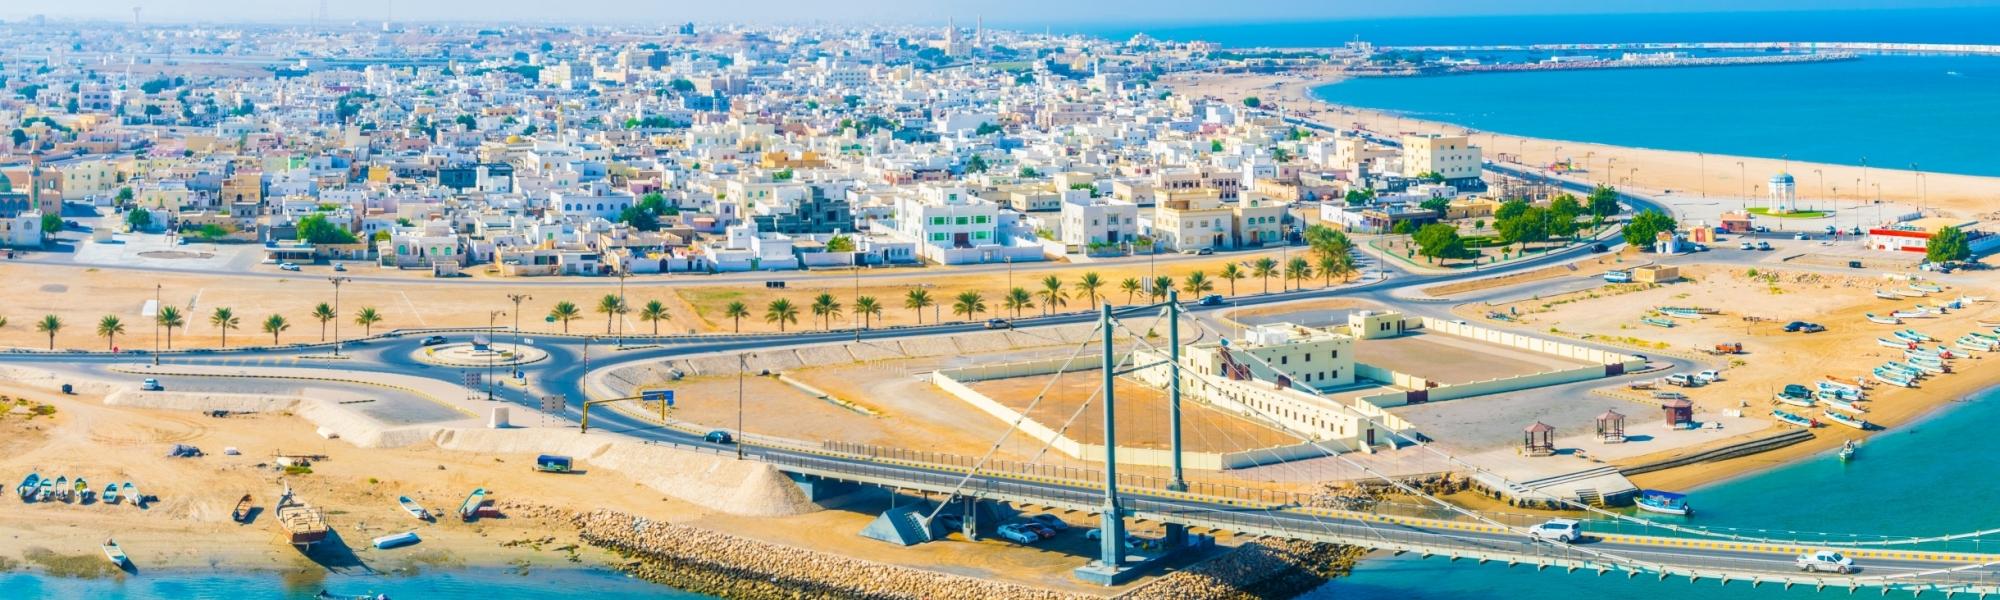 Oman to realise logistics ambitions by joining TIR